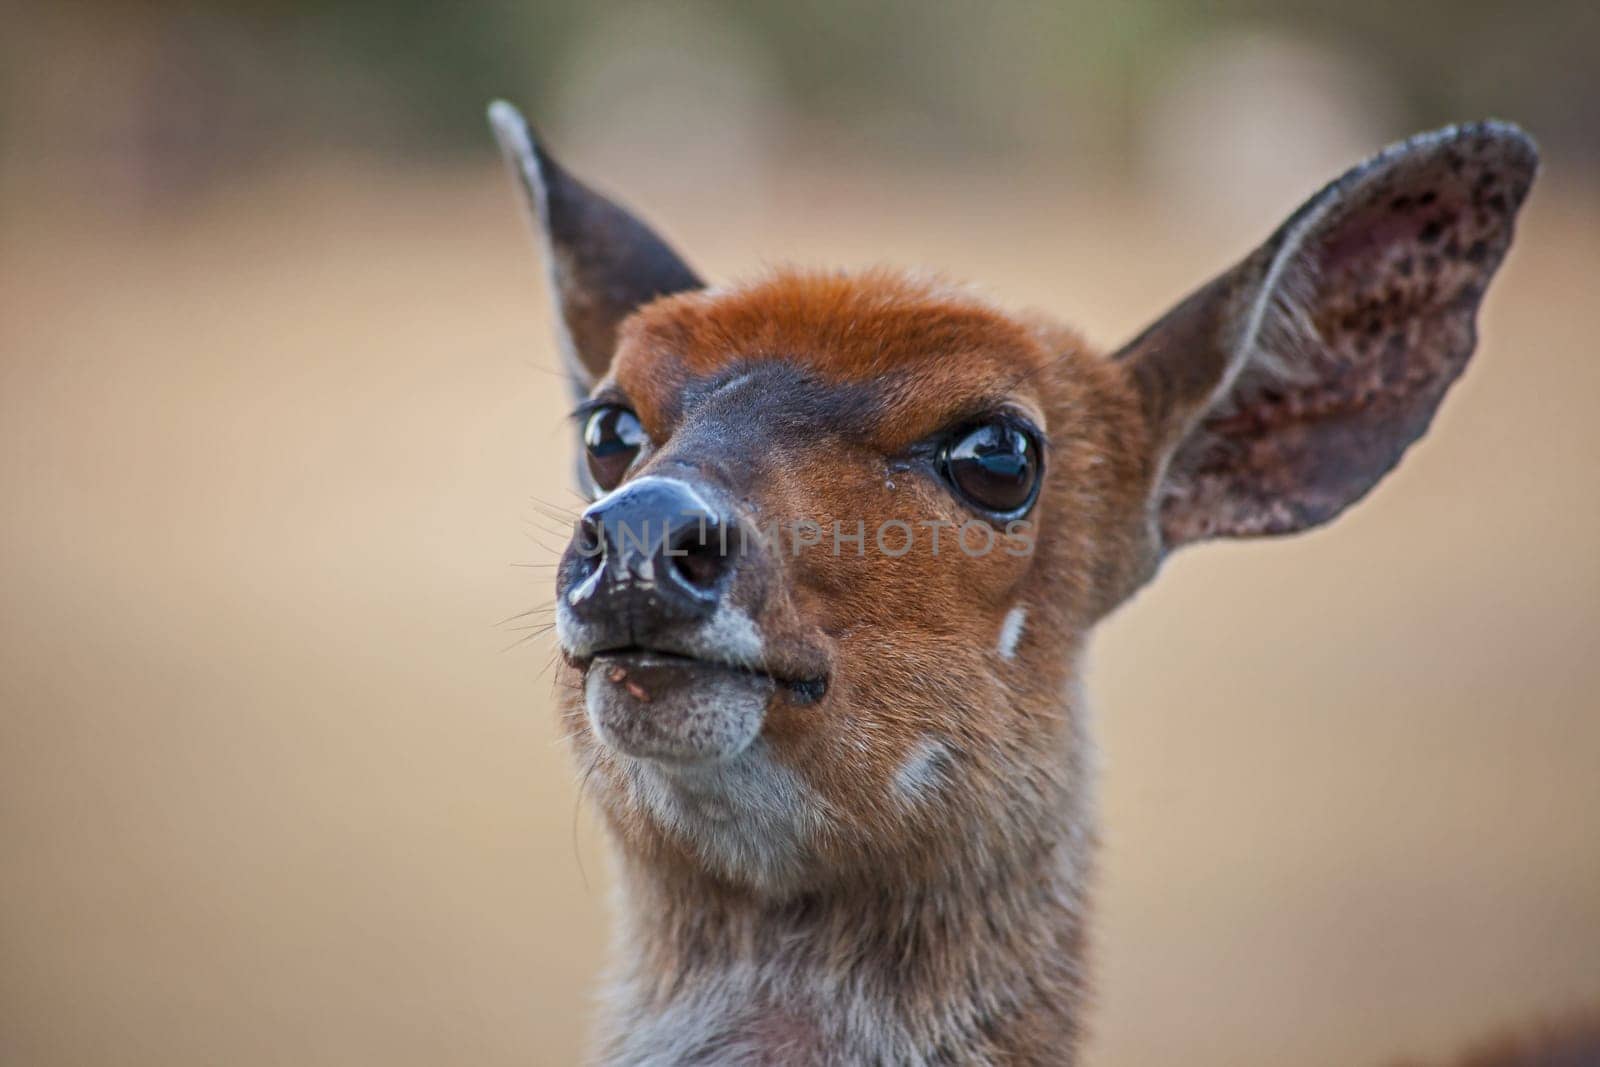 Close-up image of a young female Bushbuck (Tragelaphus scriptus) in the Royal Natal National Park, Kwa-Zulu Natal Province South Africa